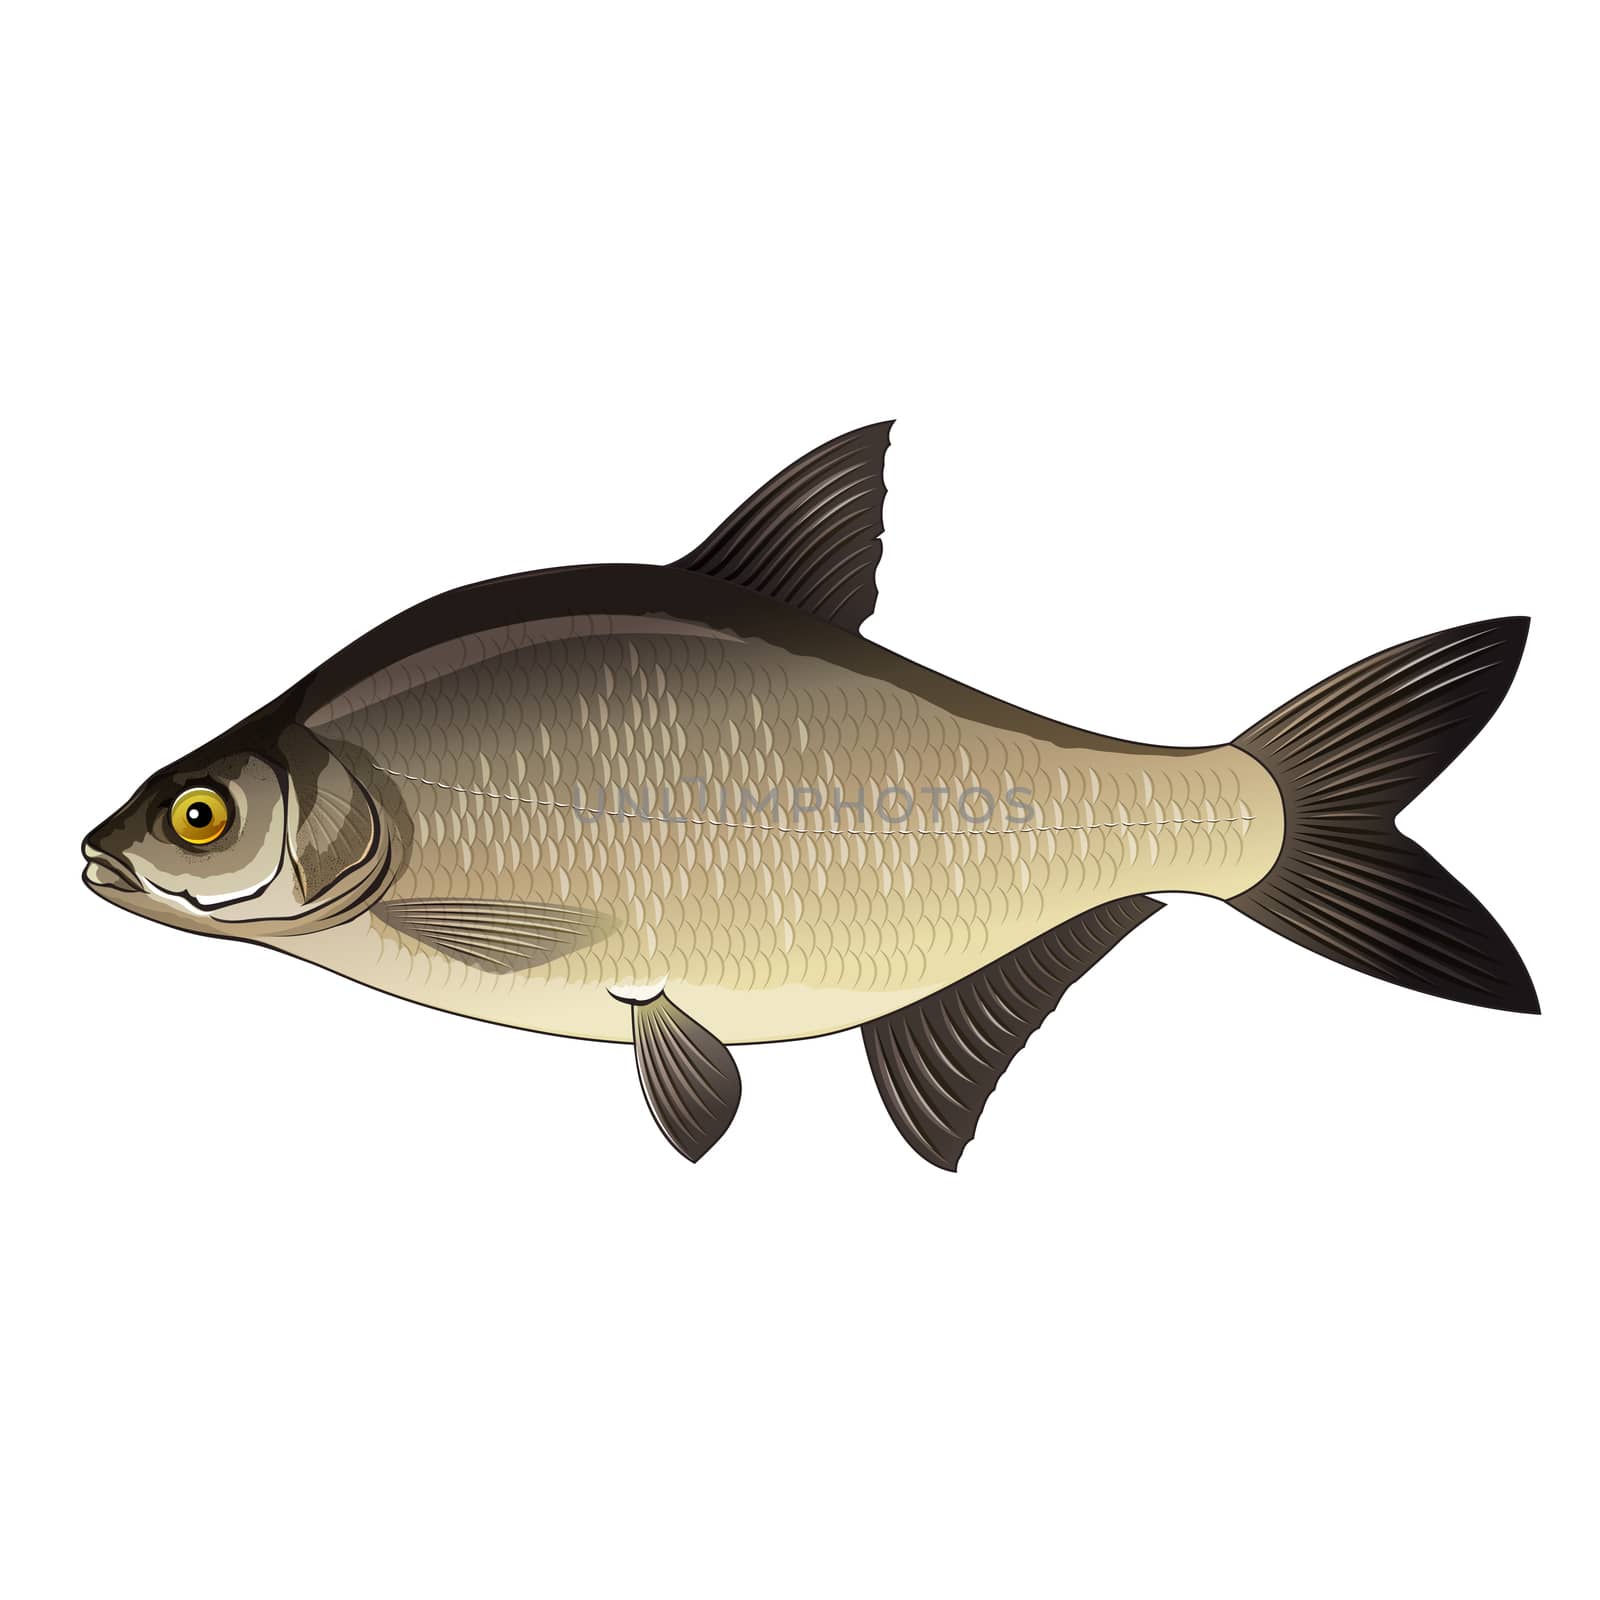 Bream, Isolated Illustration by ConceptCafe